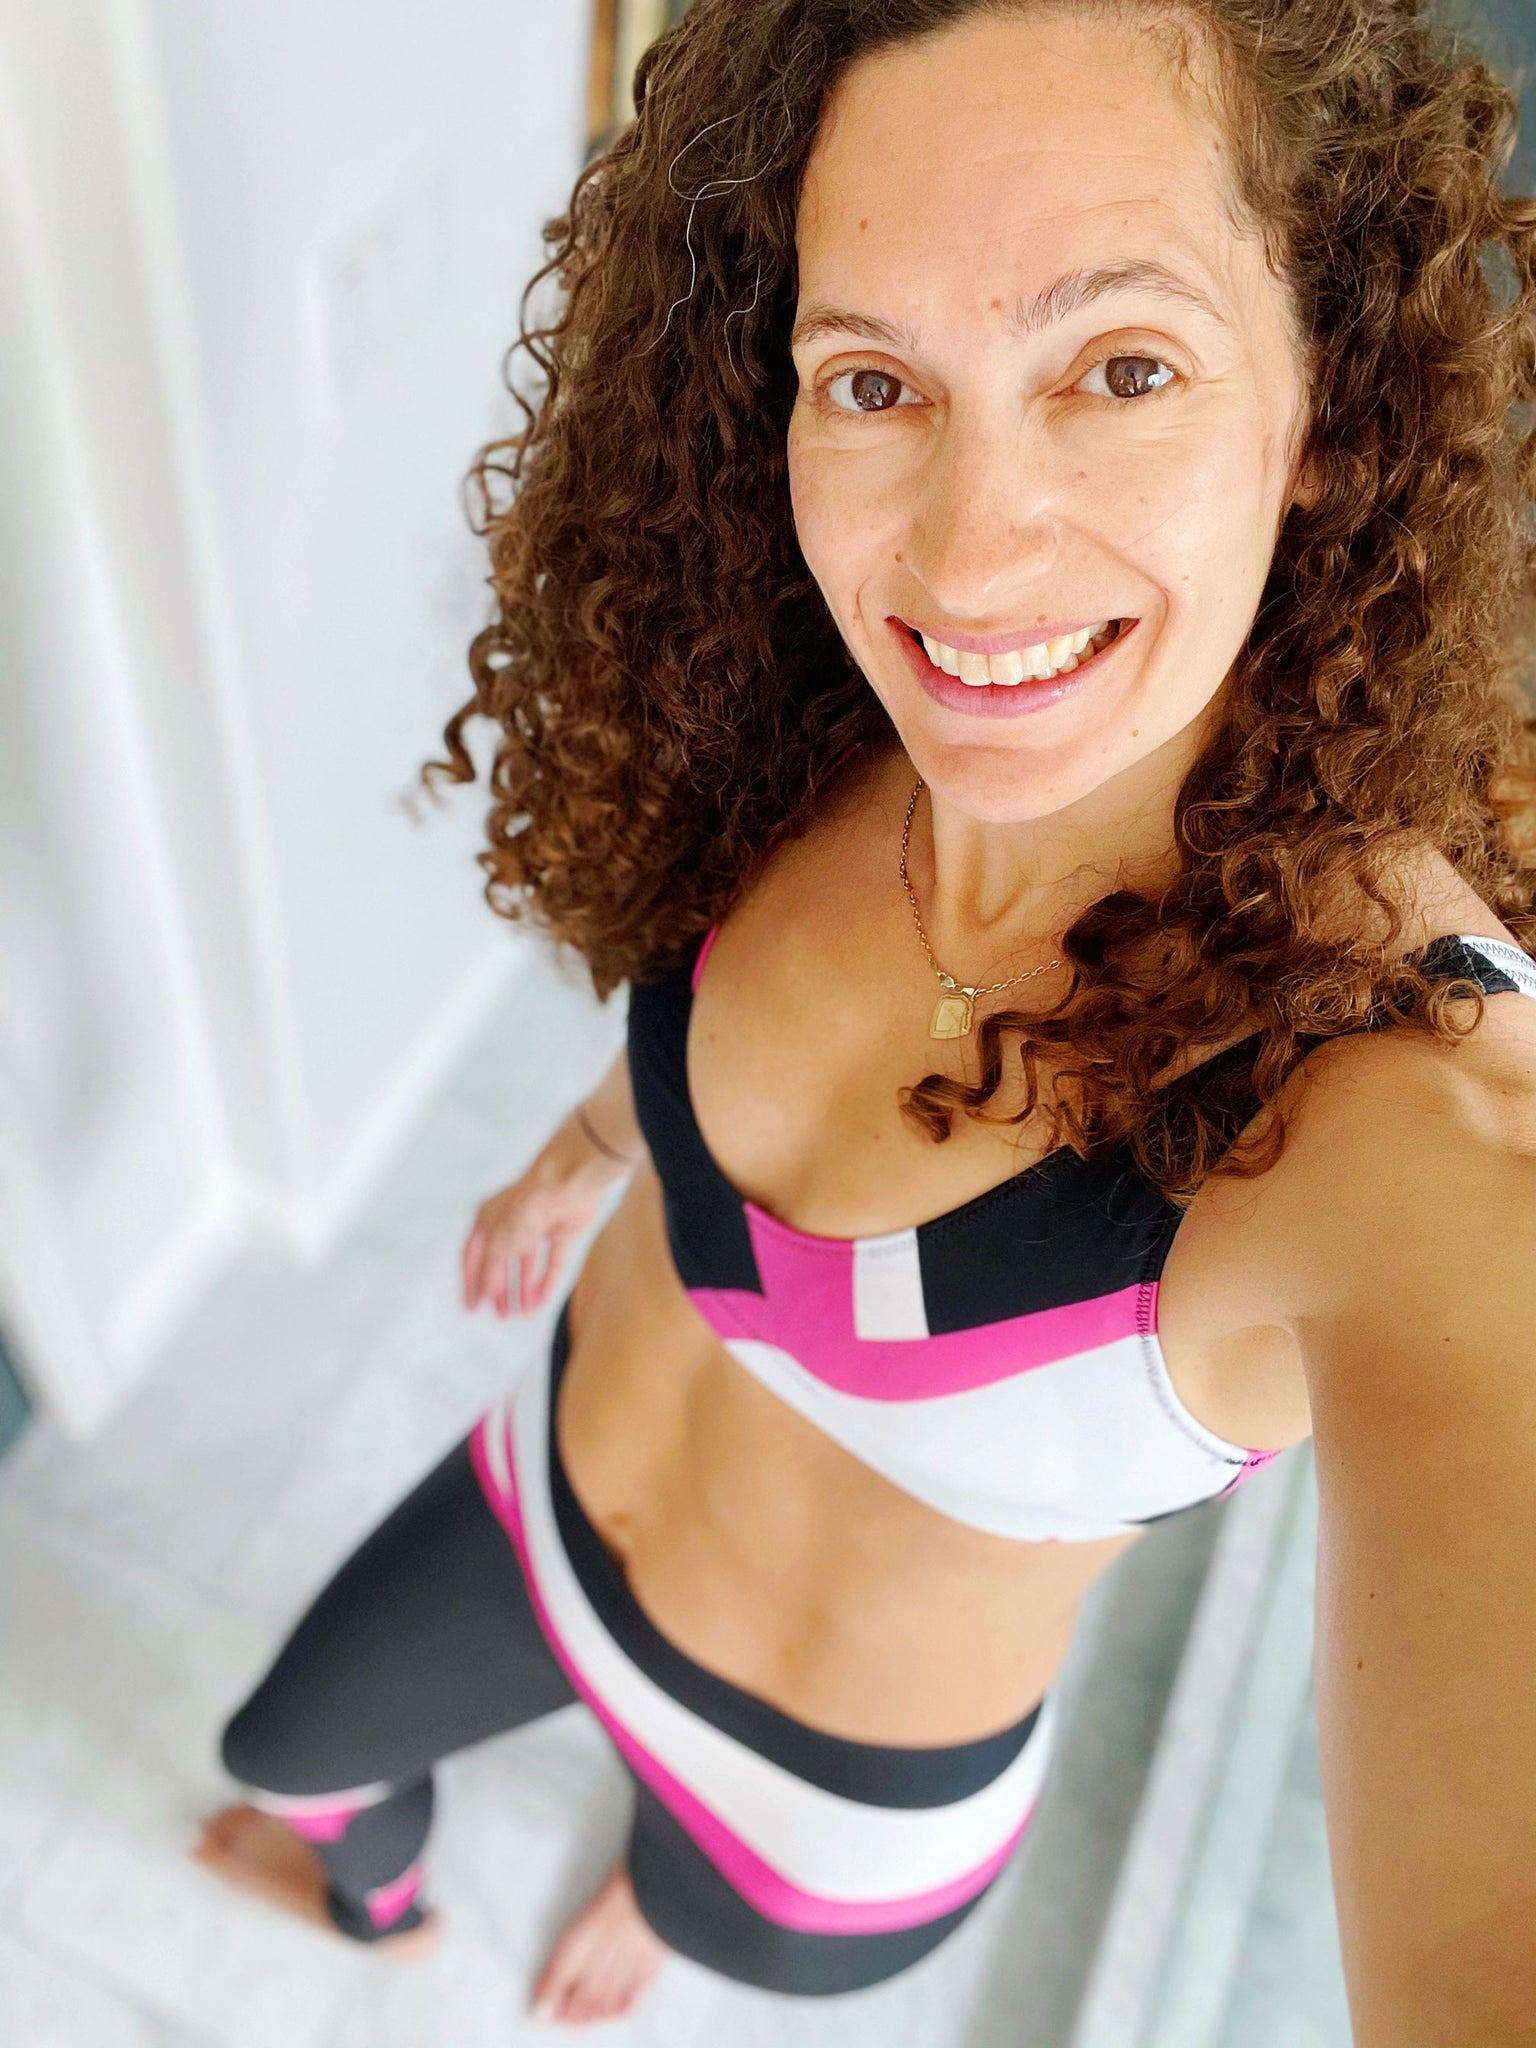 Our signature color block style in a vibrant pink, black and white with the word "Goddess" down one leg, on these high-waisted compression leggings shown here with matching bralette.